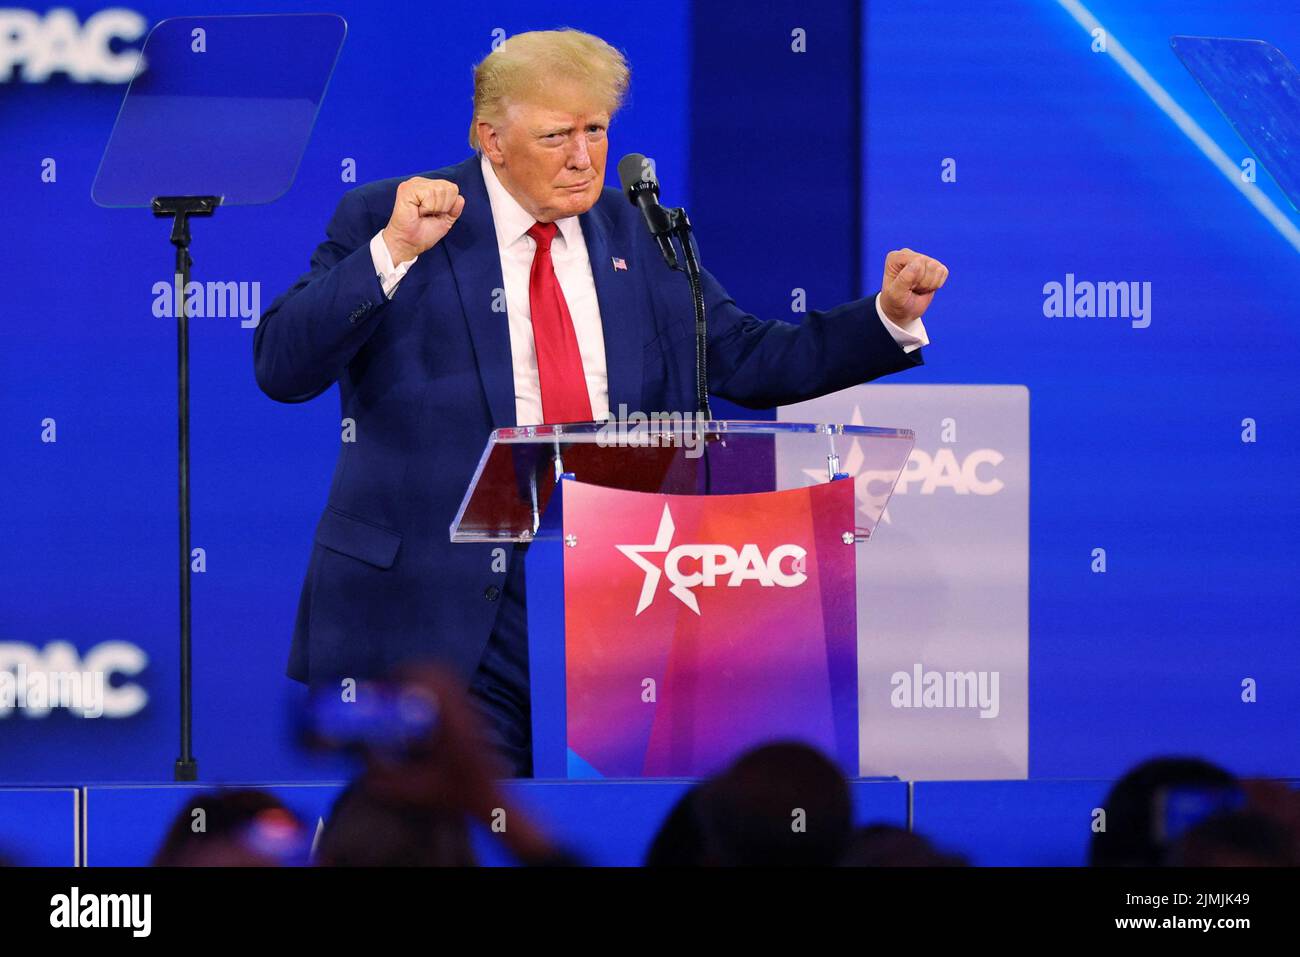 Former U.S. President Donald Trump dances onstage after speaking at the Conservative Political Action Conference (CPAC) in Dallas, Texas, U.S., August 6, 2022.  REUTERS/Brian Snyder Stock Photo